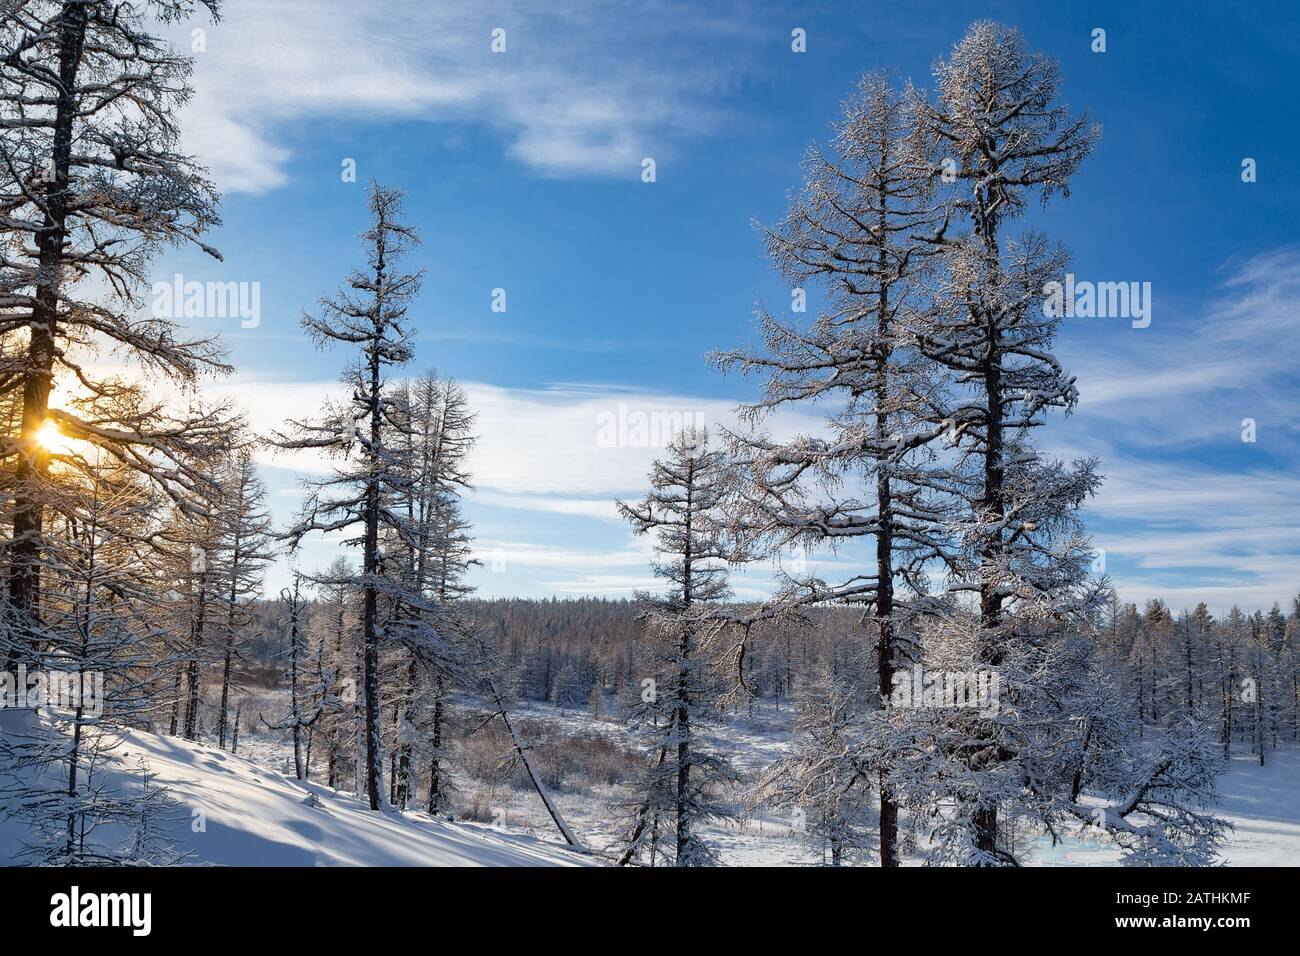 Winter landscape in South Yakutia, Russia, on a frosty sunny day Stock Photo